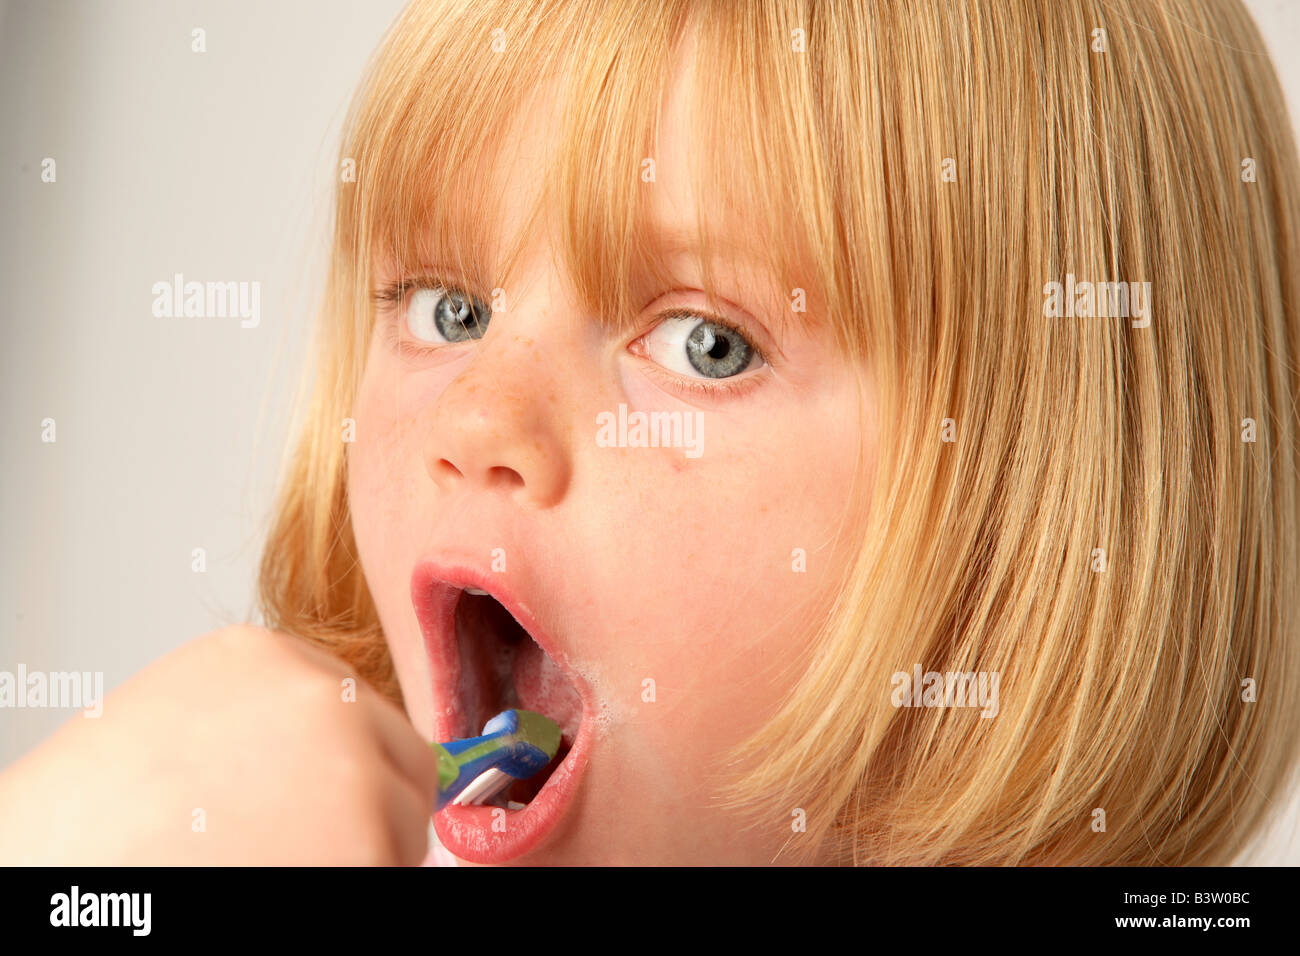 A young girl cleaning her teeth Stock Photo